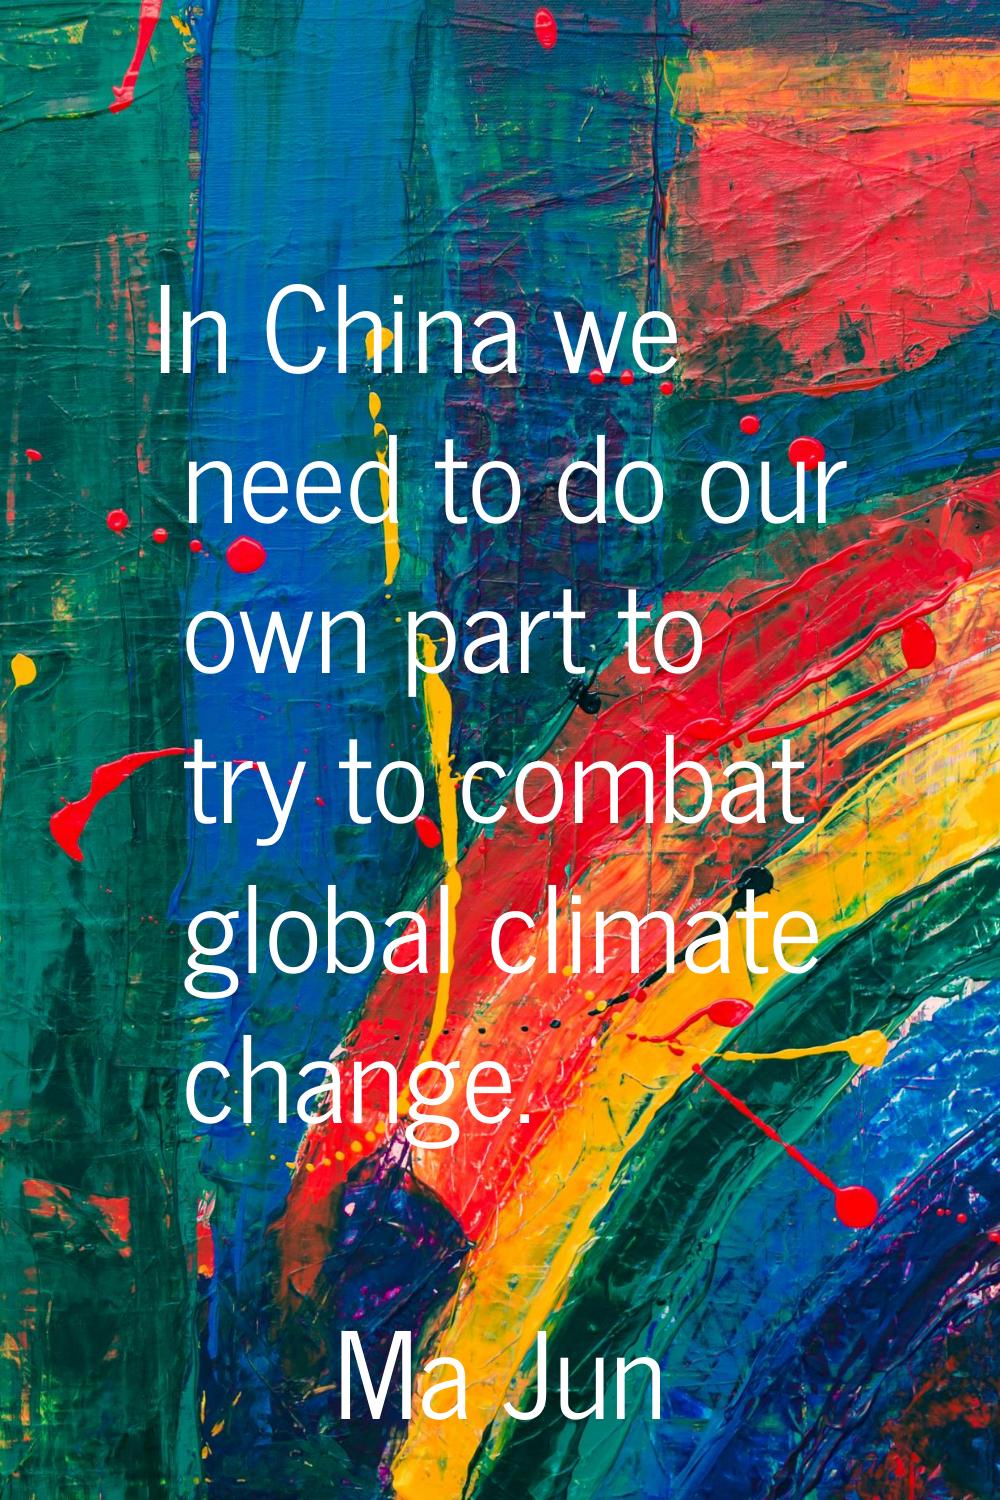 In China we need to do our own part to try to combat global climate change.